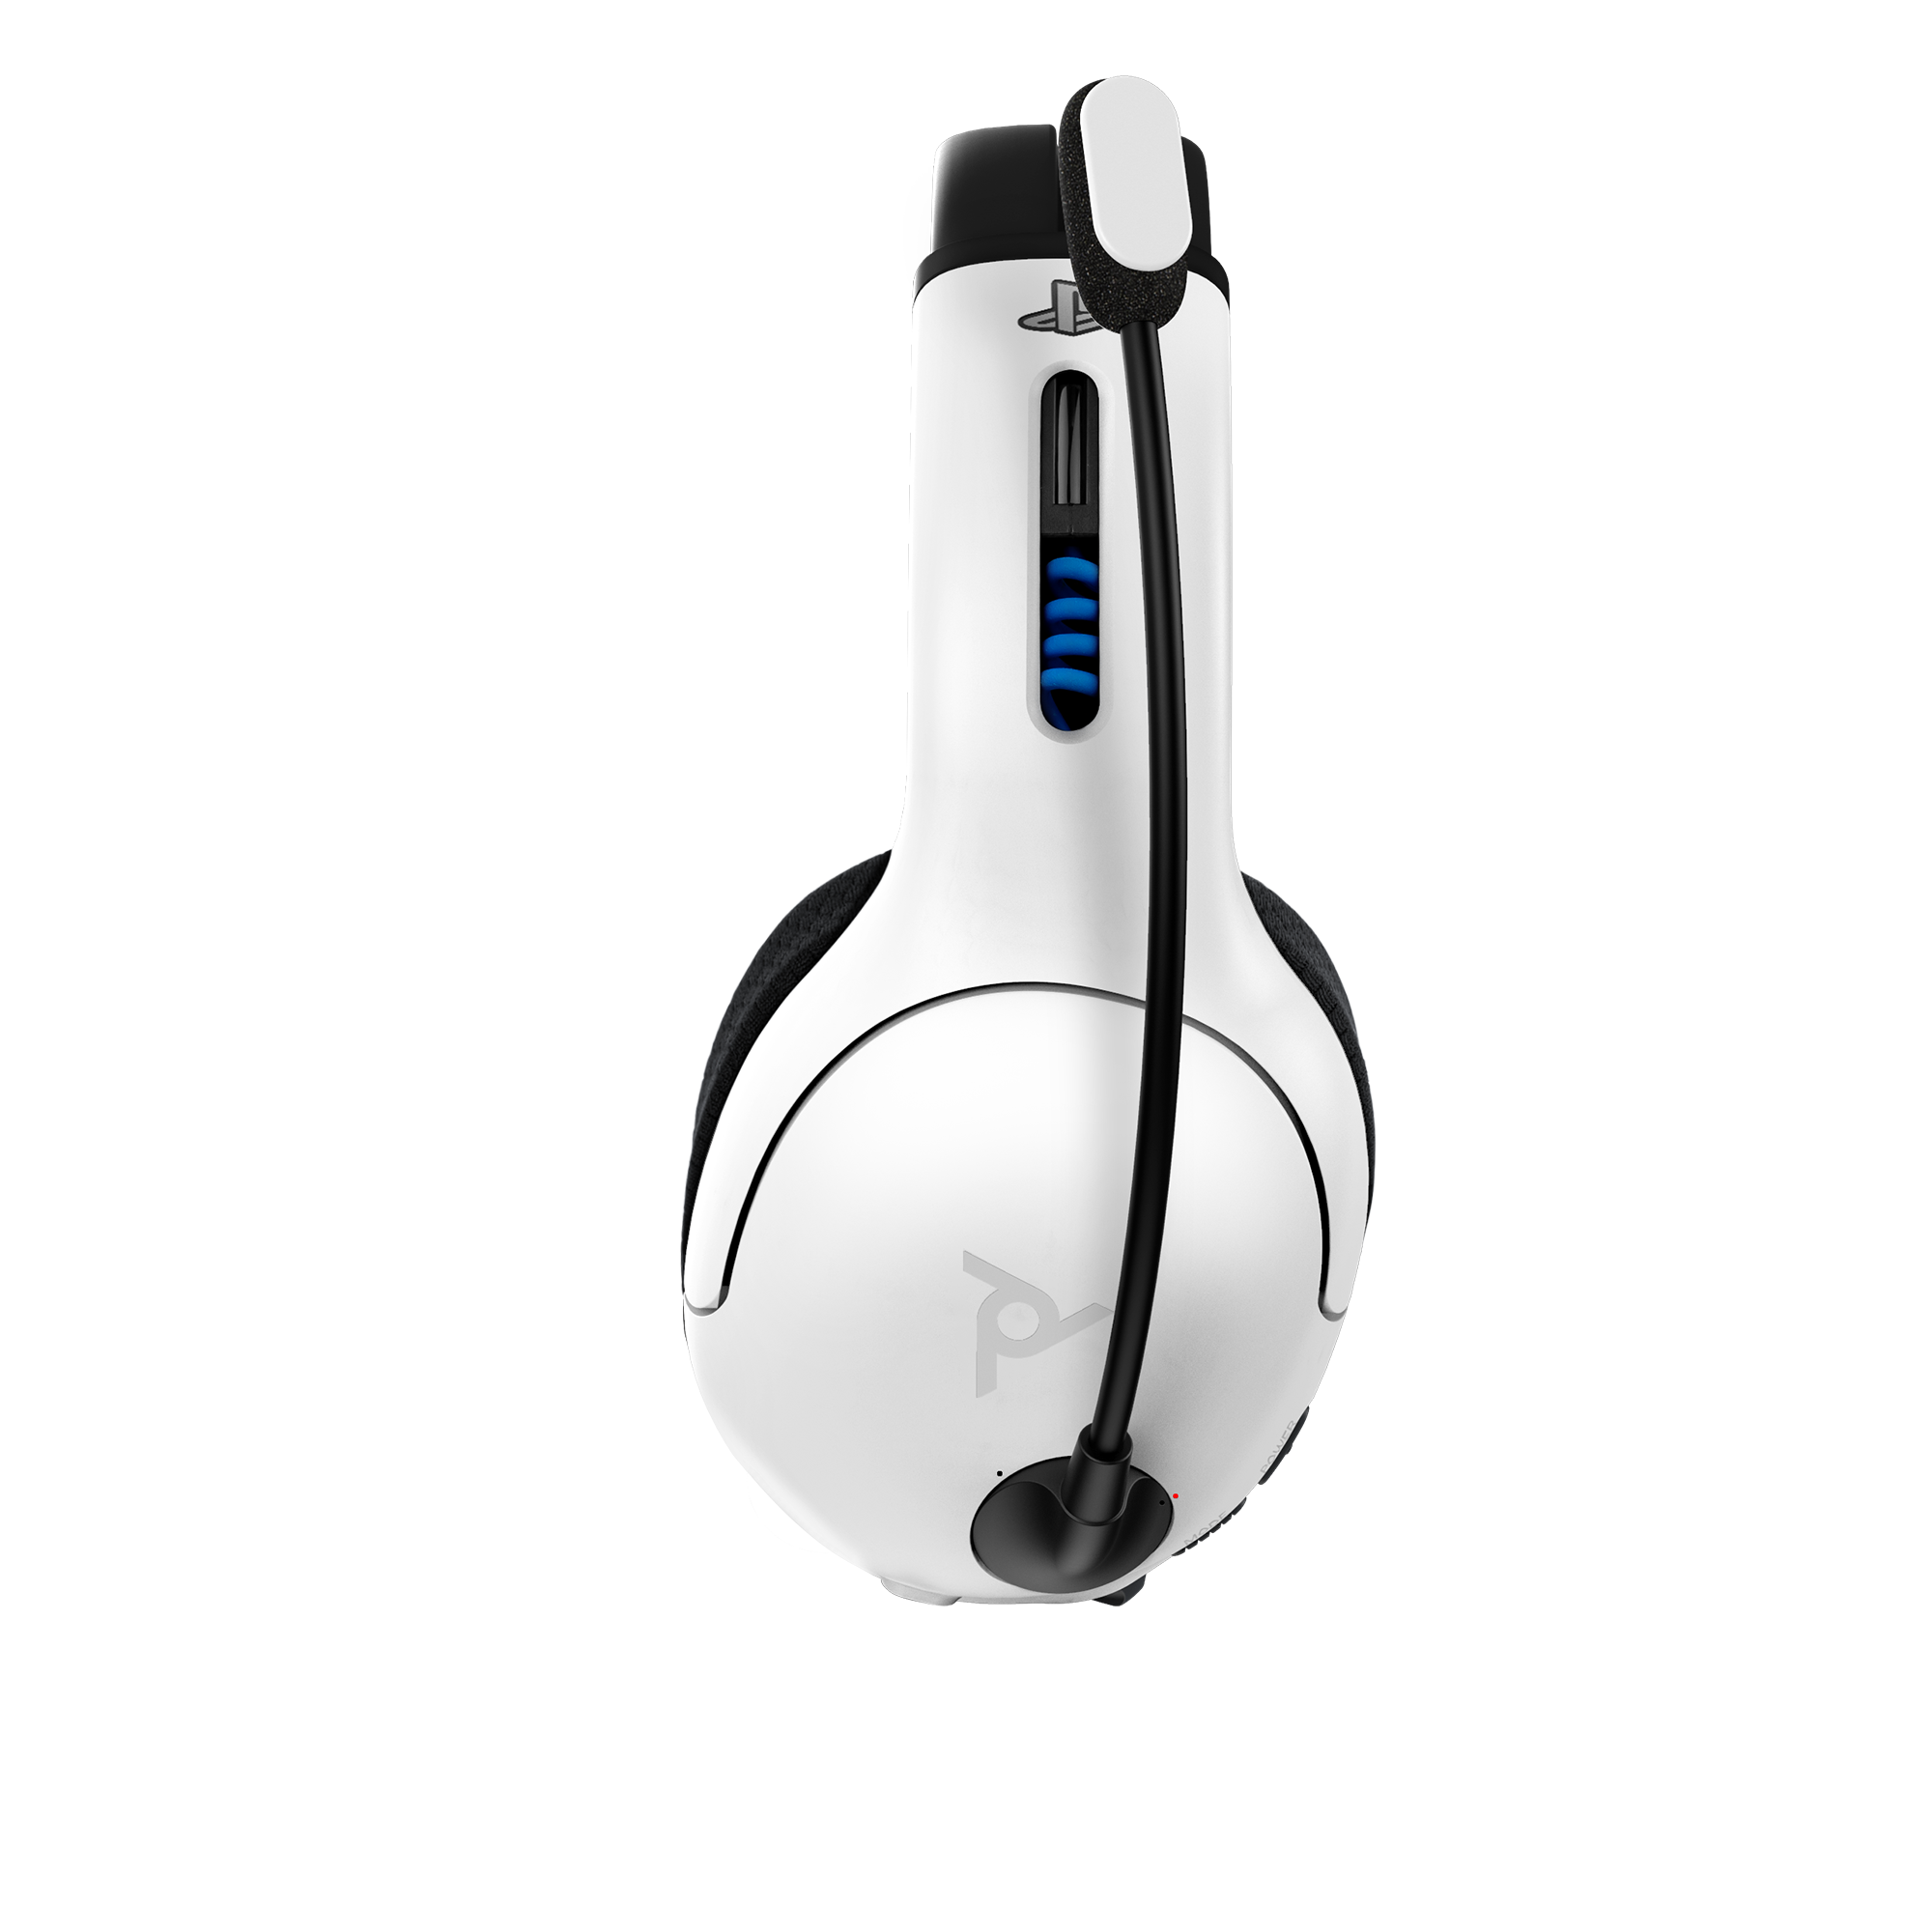 PDP Gaming LVL50 Wireless Stereo Headset with Noise Cancelling Microphone:  Black - Xbox One